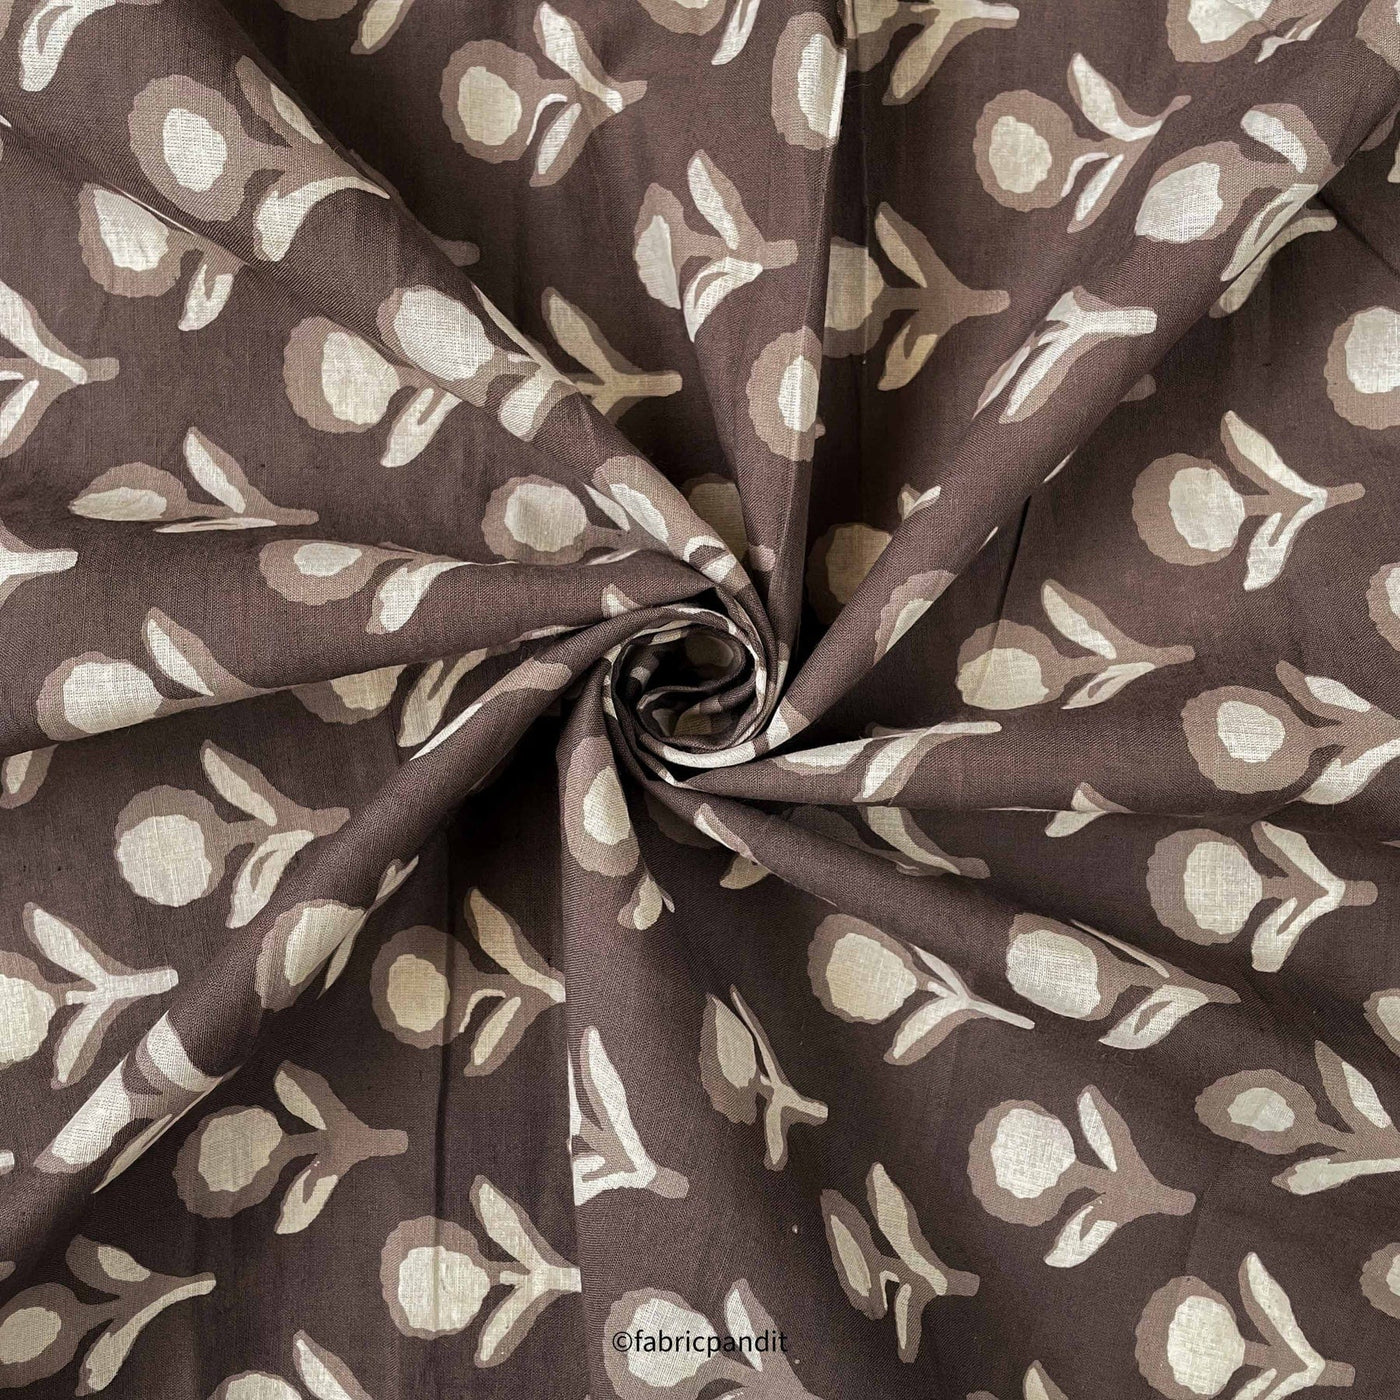 Hand Block Printed Cotton Fabric Cut Piece (CUT PIECE) Brown Indigo Dabu Natural Dyed Abstract Roses Hand Block Printed Pure Cotton Modal Fabric (Width 42 inches)